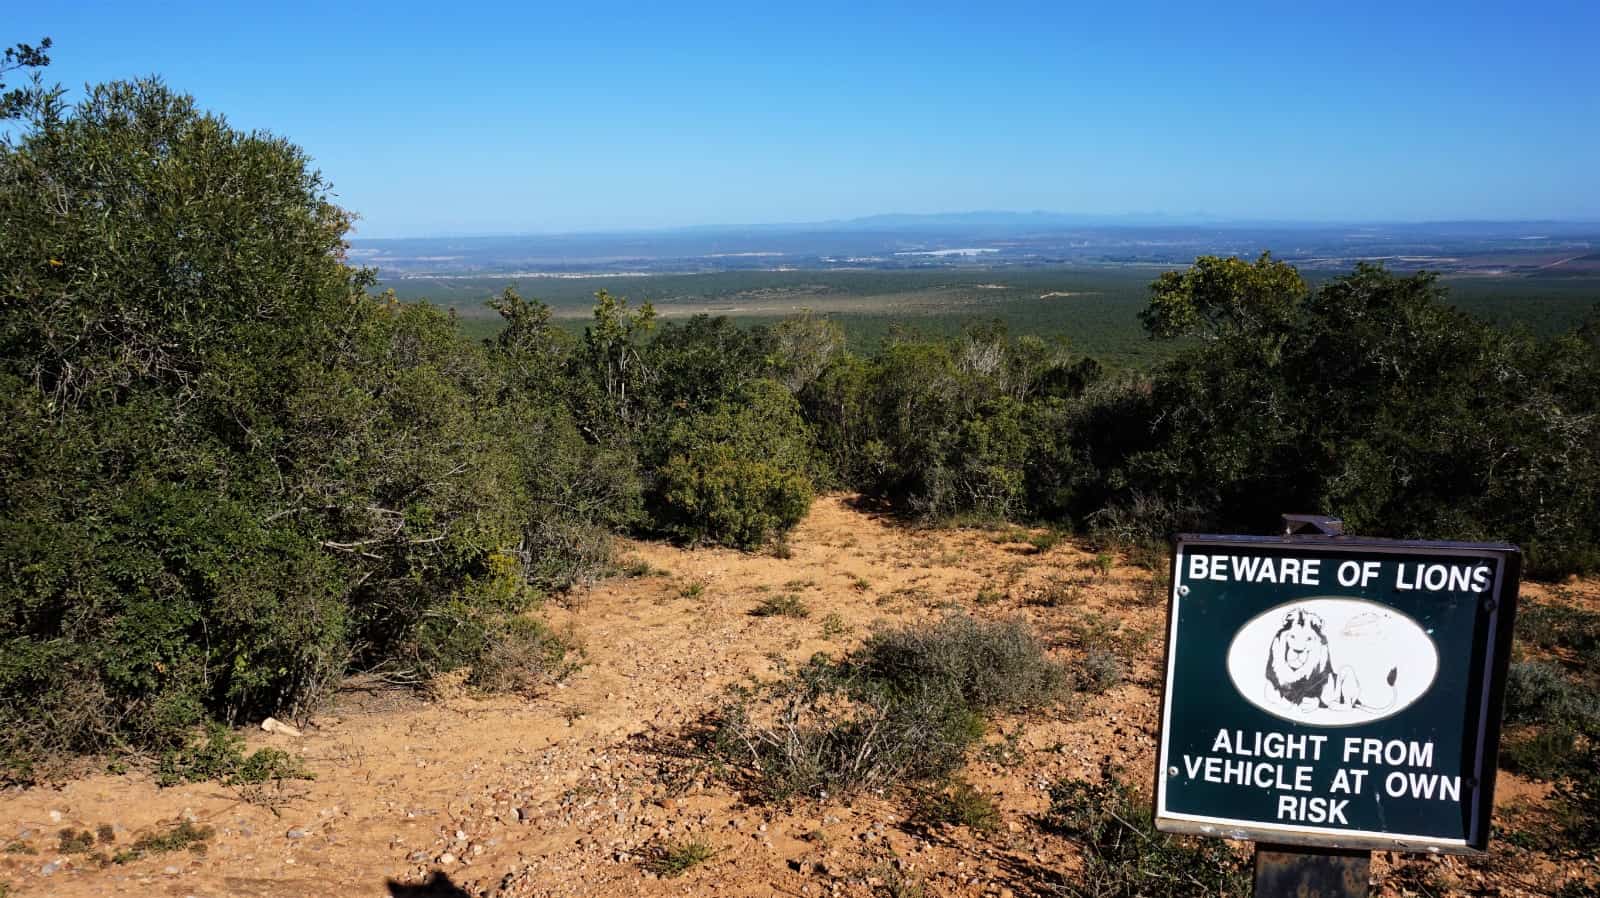 Lookout point at Addo Elephant National Park, South Africa